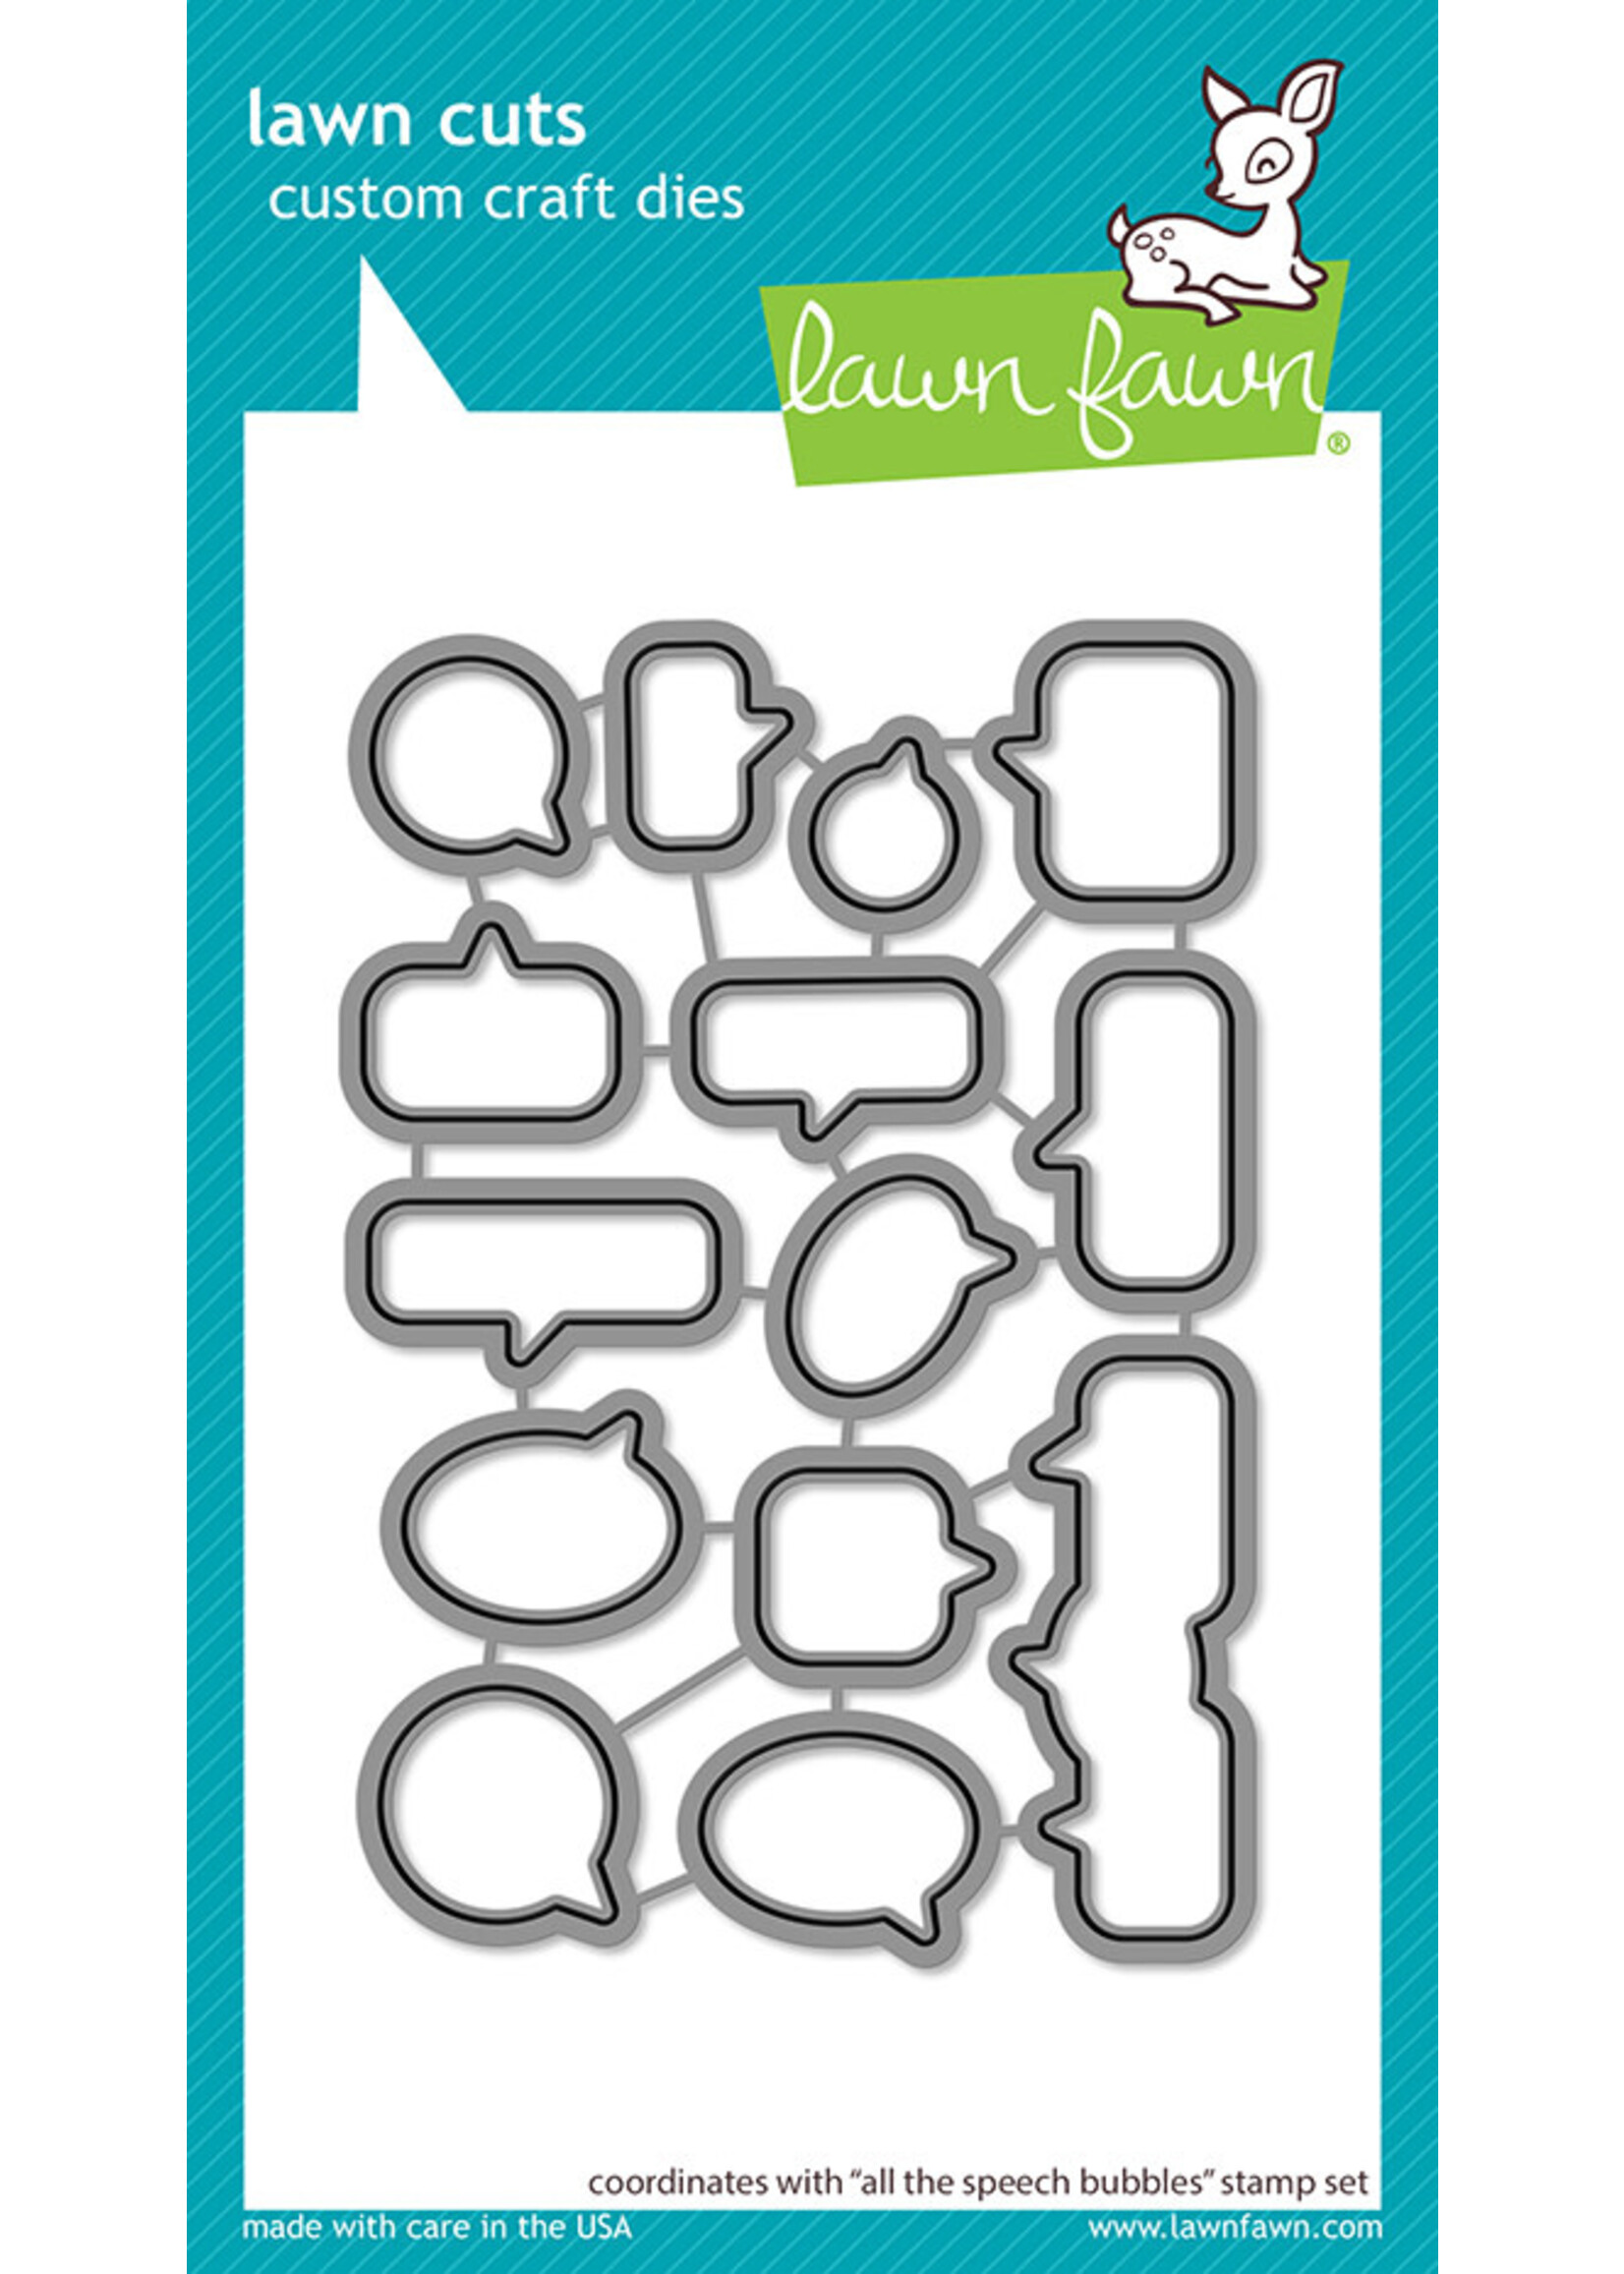 Lawn Fawn all the speech bubbles stamp & die bundle